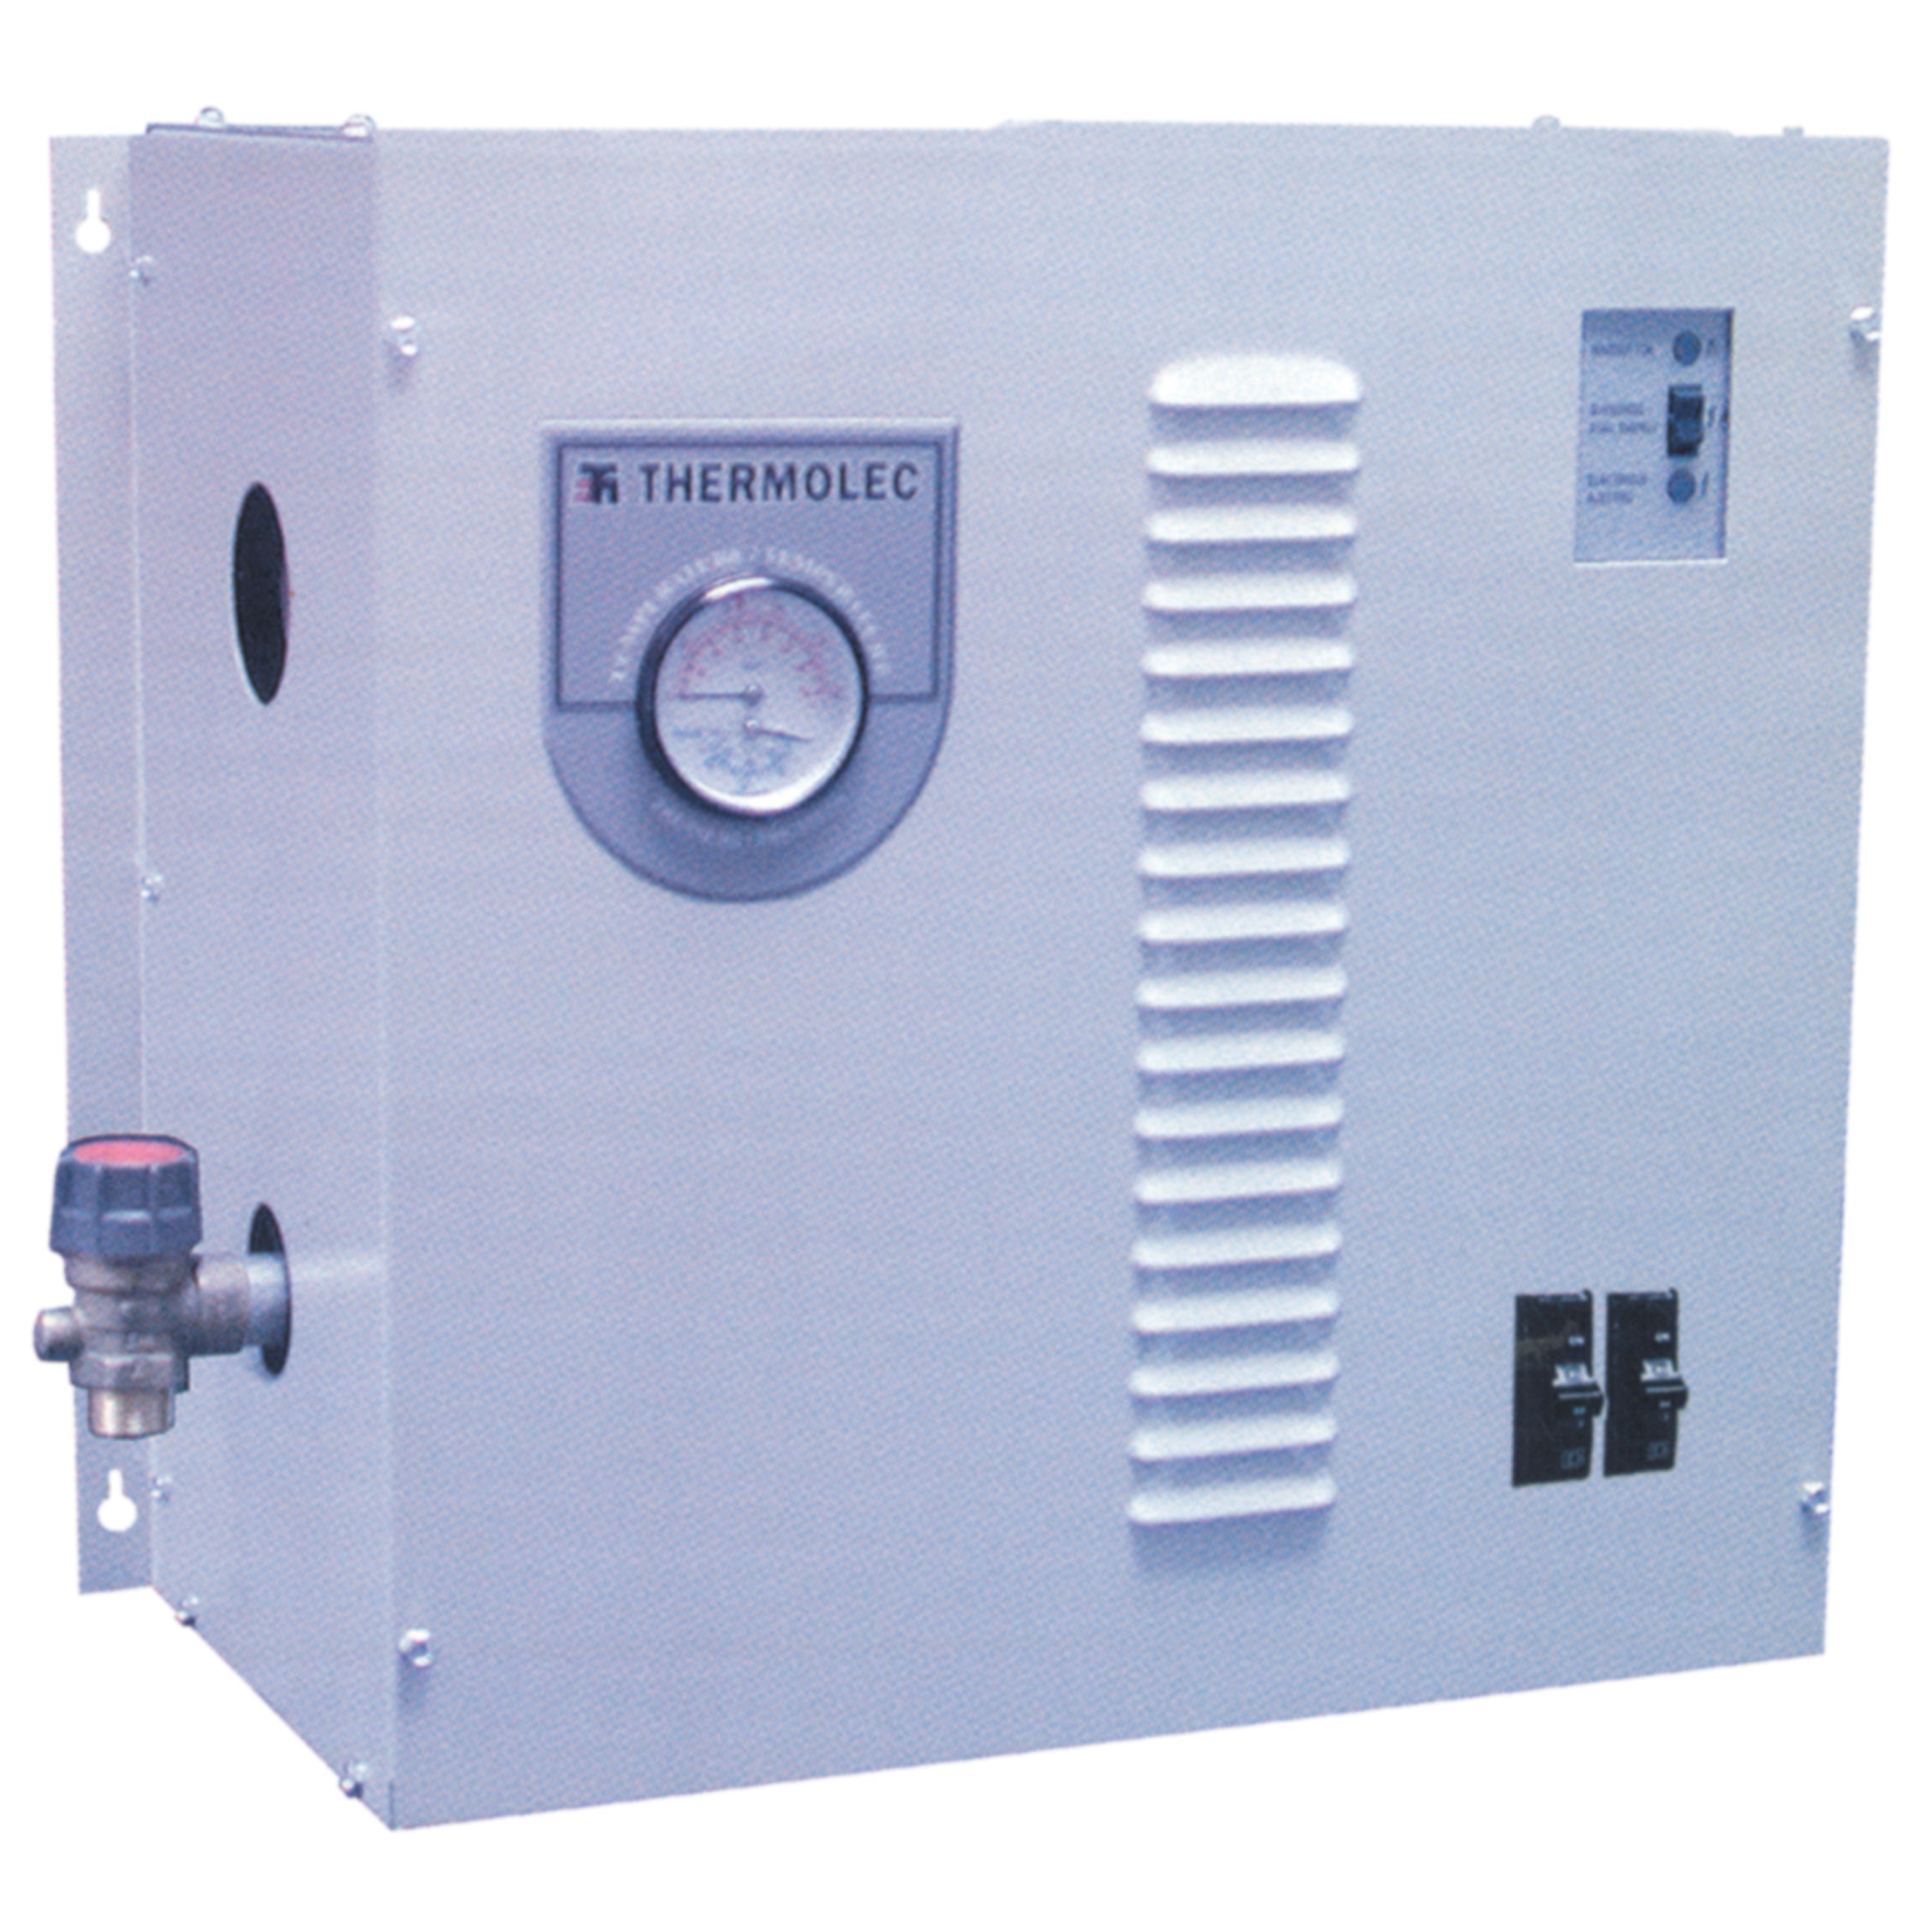 Thermolec B-15U FFB-H FFB Model Electric Boiler with Modulation, Outdoor Reset and Dual Fuel Control Switch - 15 kW / 51,180 BTU/Hour